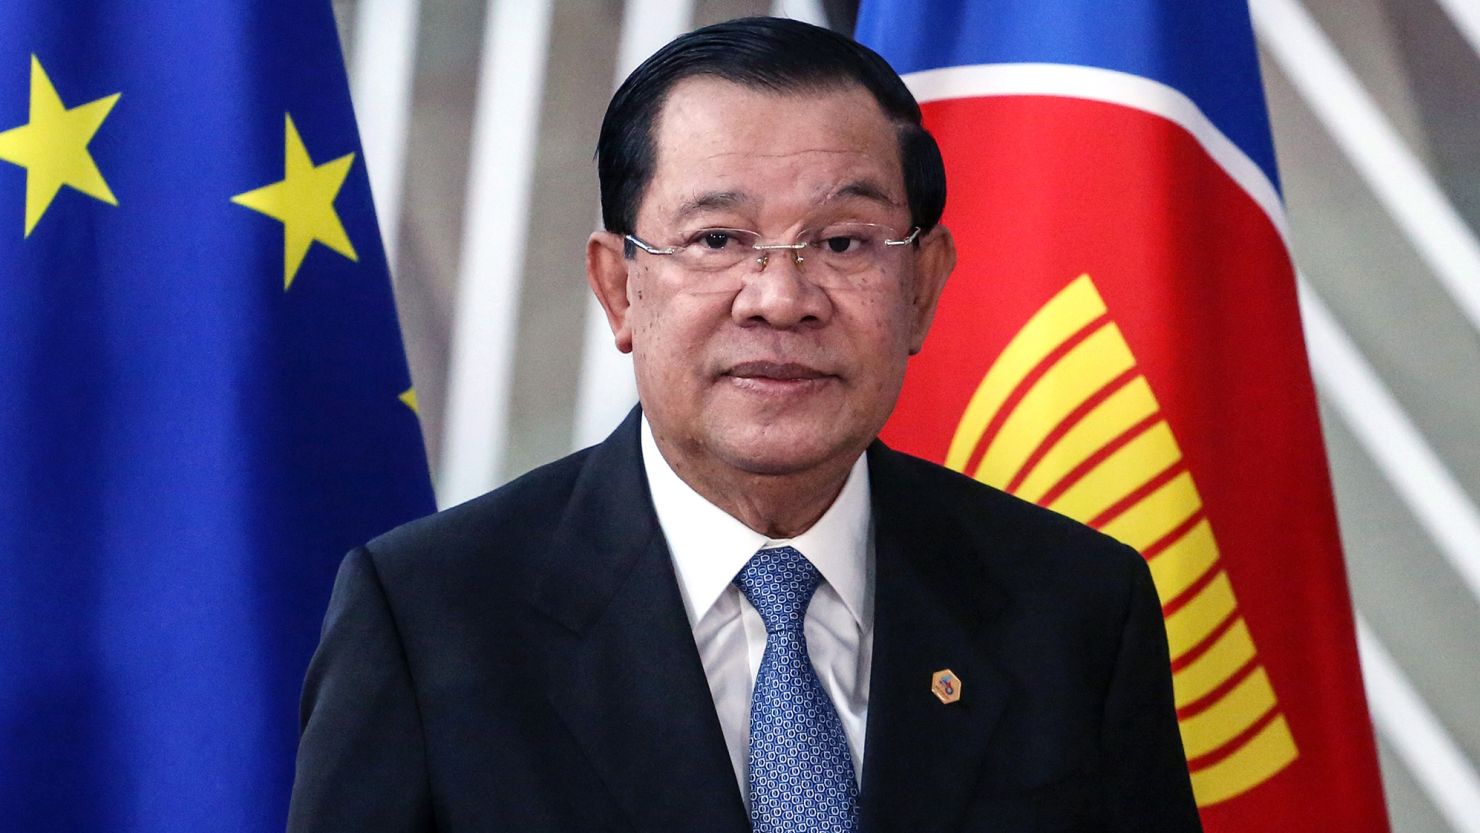 Hun Sen, Cambodia's prime minister, at the EU-ASEAN Commemorative summit in Brussels, Belgium, on Wednesday, Dec. 14, 2022. The European Union will propose a 10 billion ($10.6 billion) investment package to countries in Southeast Asia as the European bloc seeks to strengthen ties with the region to diversify supply chains and rally support against Russia. Photographer: Valeria Mongelli/Bloomberg via Getty Images